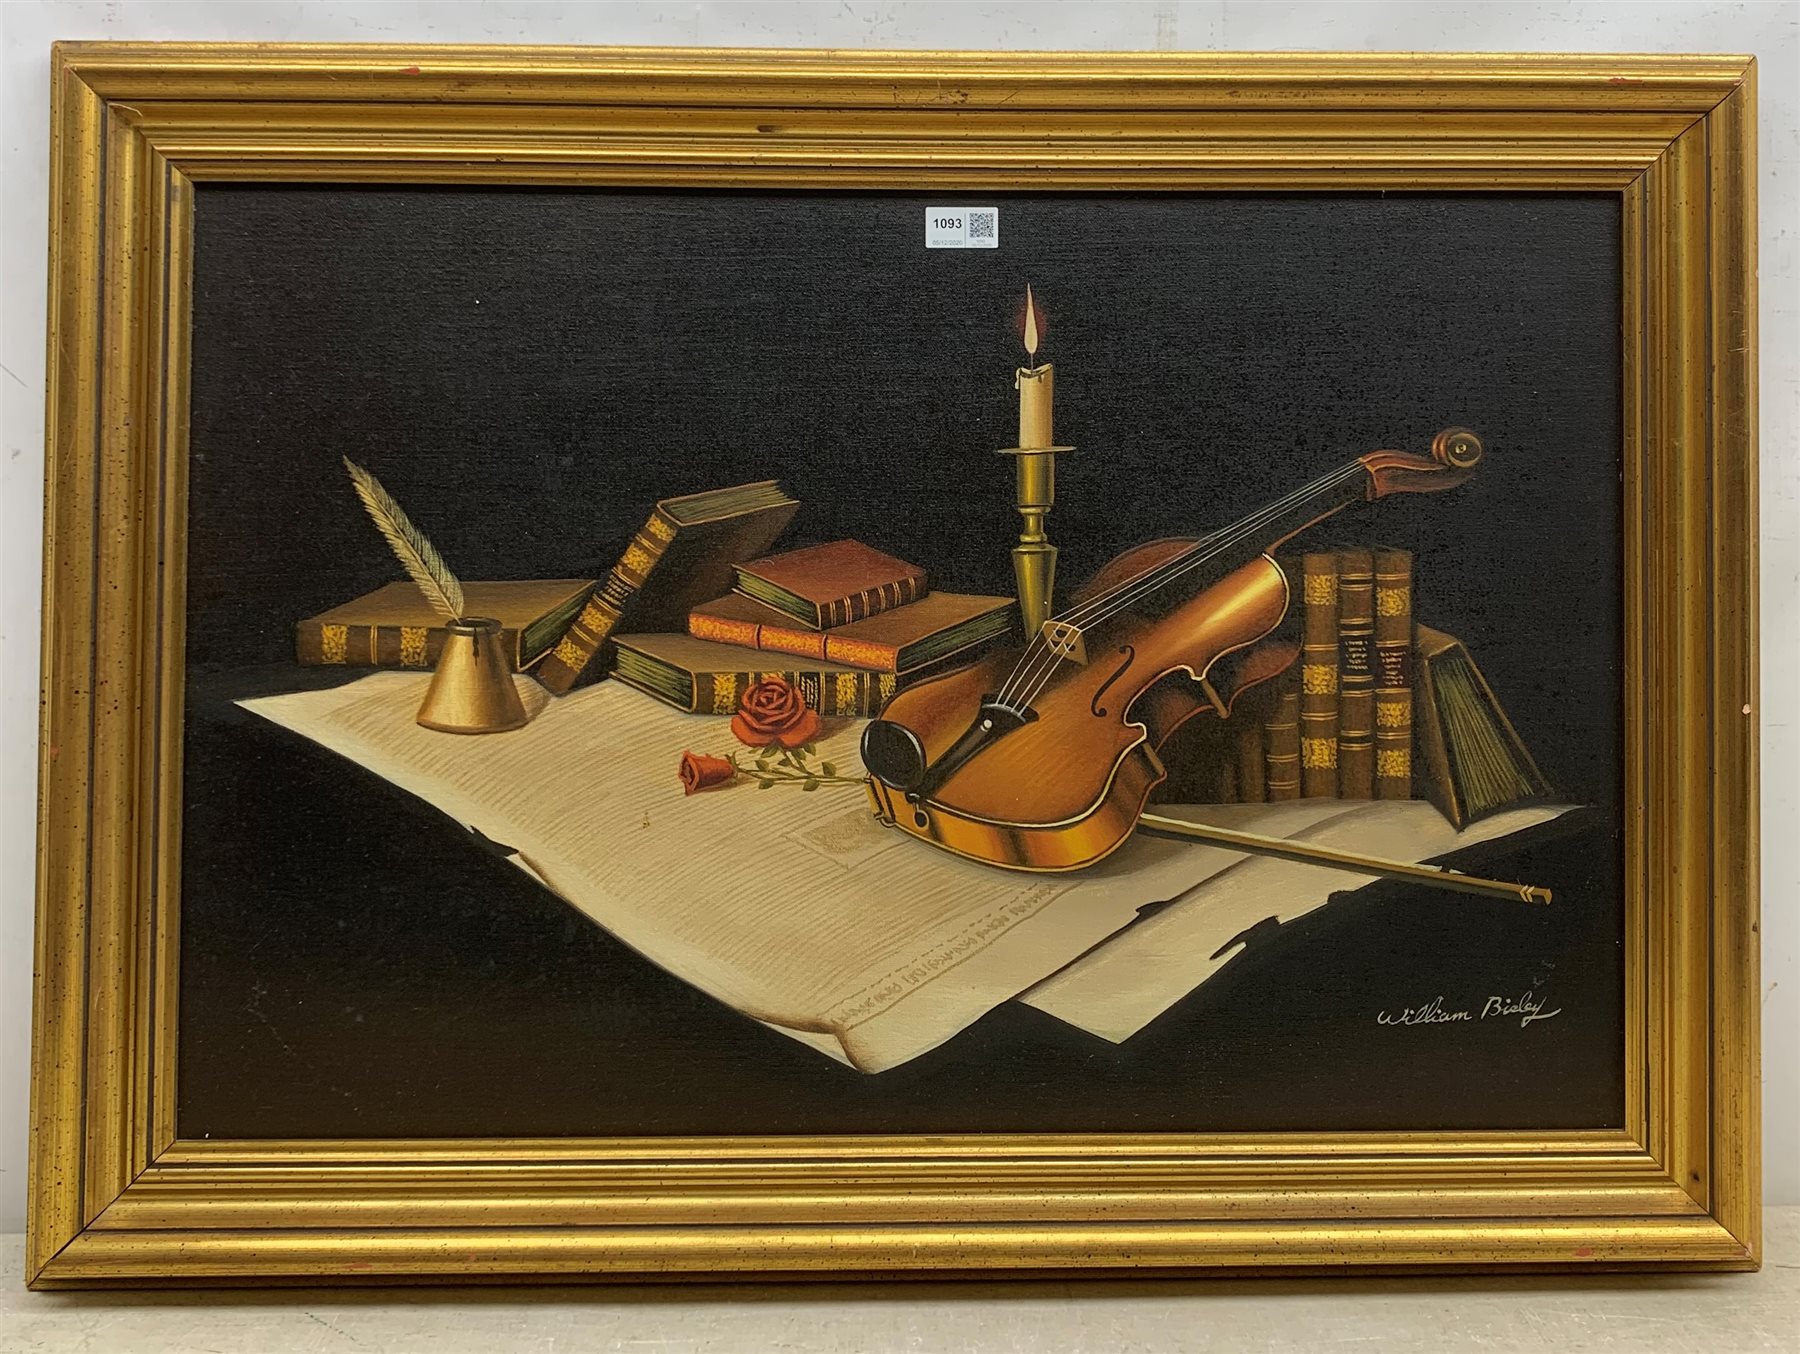 William Bisley (20th century): Still life of a Violin and Library Artefacts, oil on canvas signed 49 - Image 2 of 3